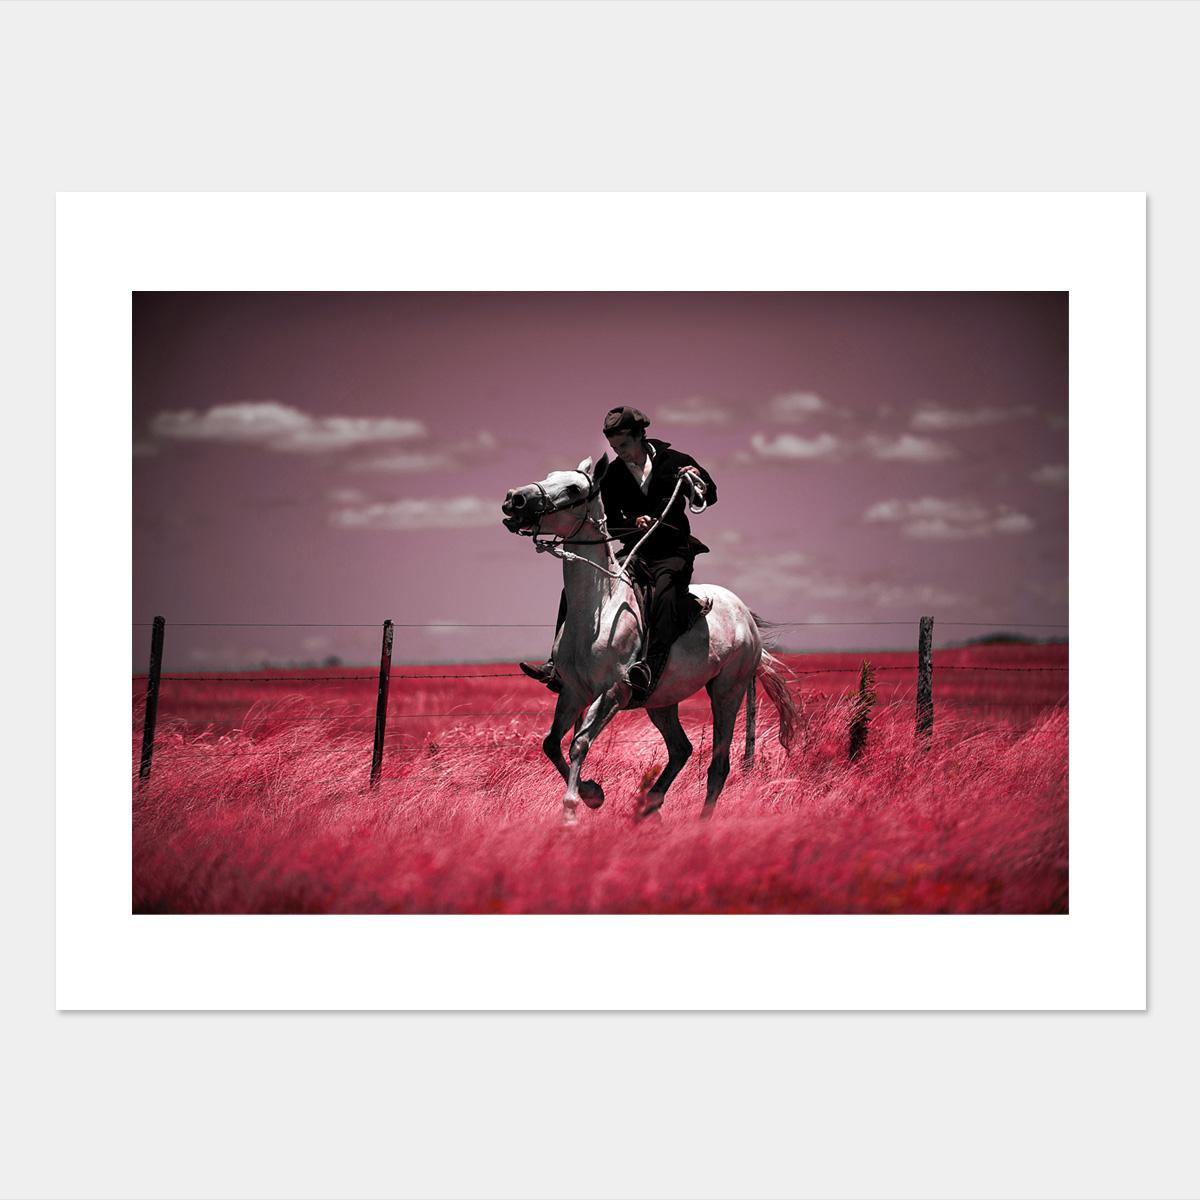 Uruguayan Gaucho 
In the style of infrared film which turns all things green into pink.
1/25 

From Horses and Humans Collection By Vanessa Taylor.

Also available in different sizes.